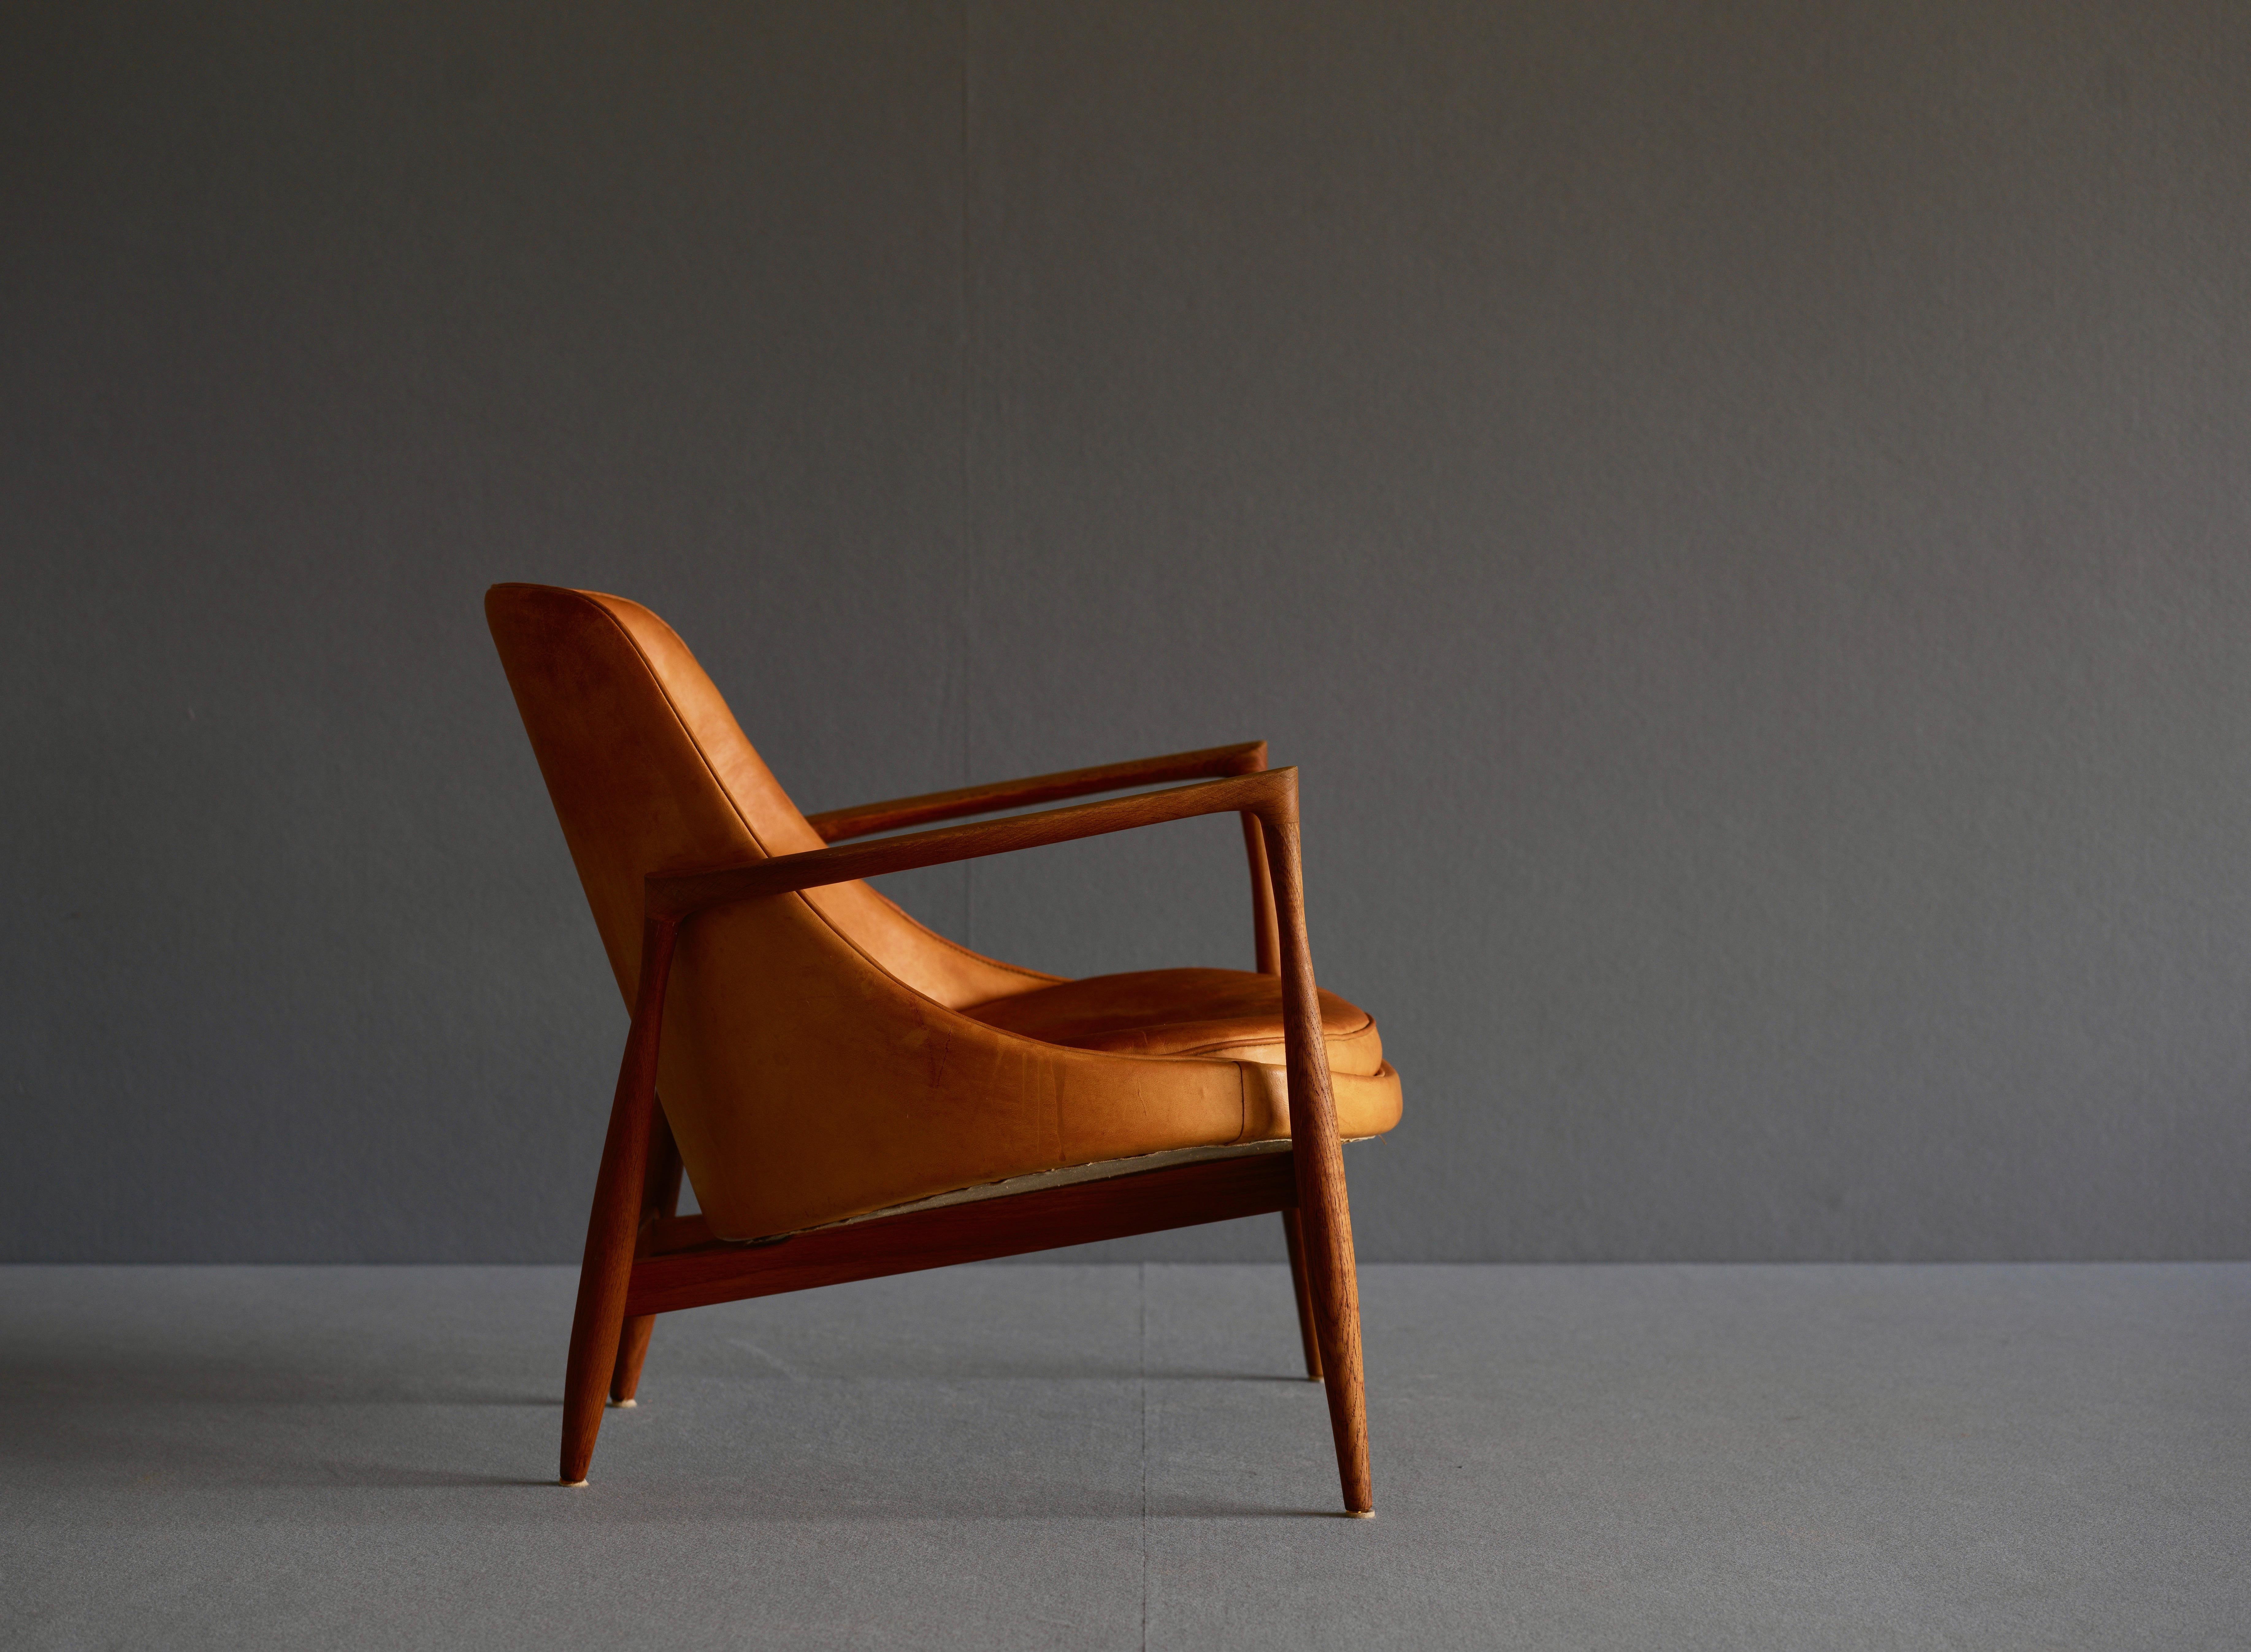 “Elizabeth” chair by Ib Kofod-Larsen by Christensen & Larsen Cabinetmakers. It is in oak with the seat and back upholstered in patinated natural leather. It is circa 1960. The original stamping remains.

These chairs were initially known as the